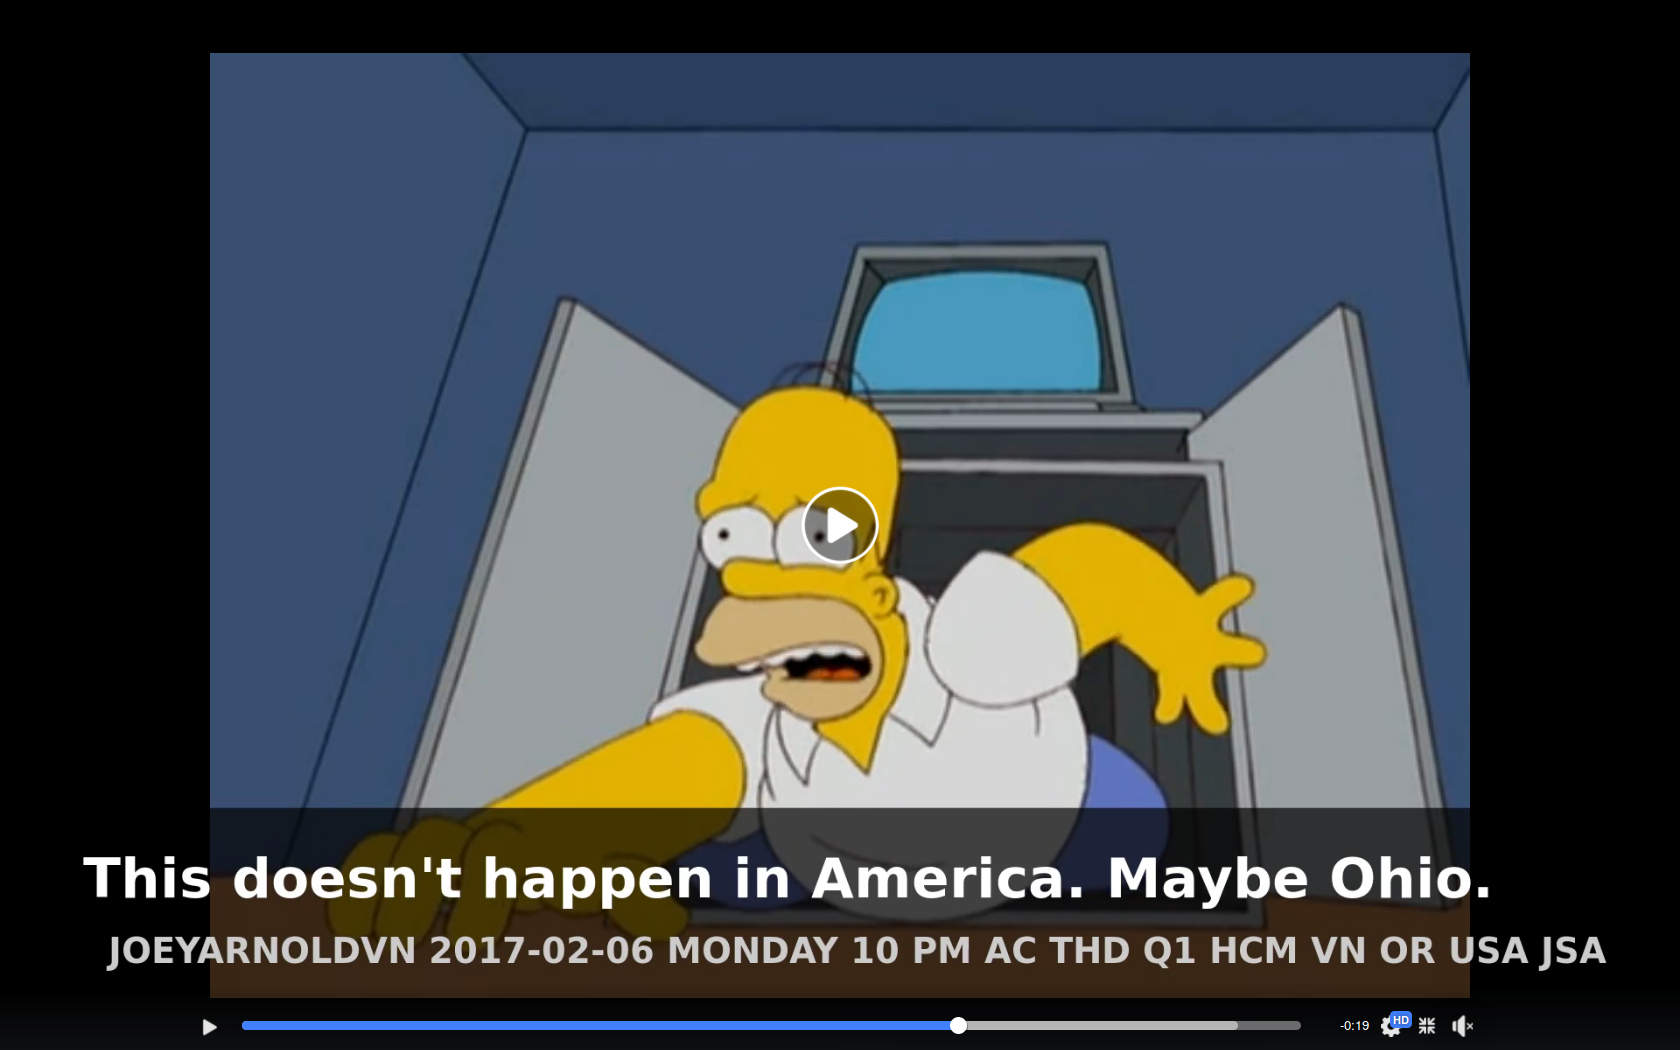 2017-02-06 - Monday - 10:00 PM ICT - Simpsons Obama Rigged Elections Meme Video - 1 Minute by Oatmeal Joey at AC THD Screenshot at 2019-11-01 23:59:43.png